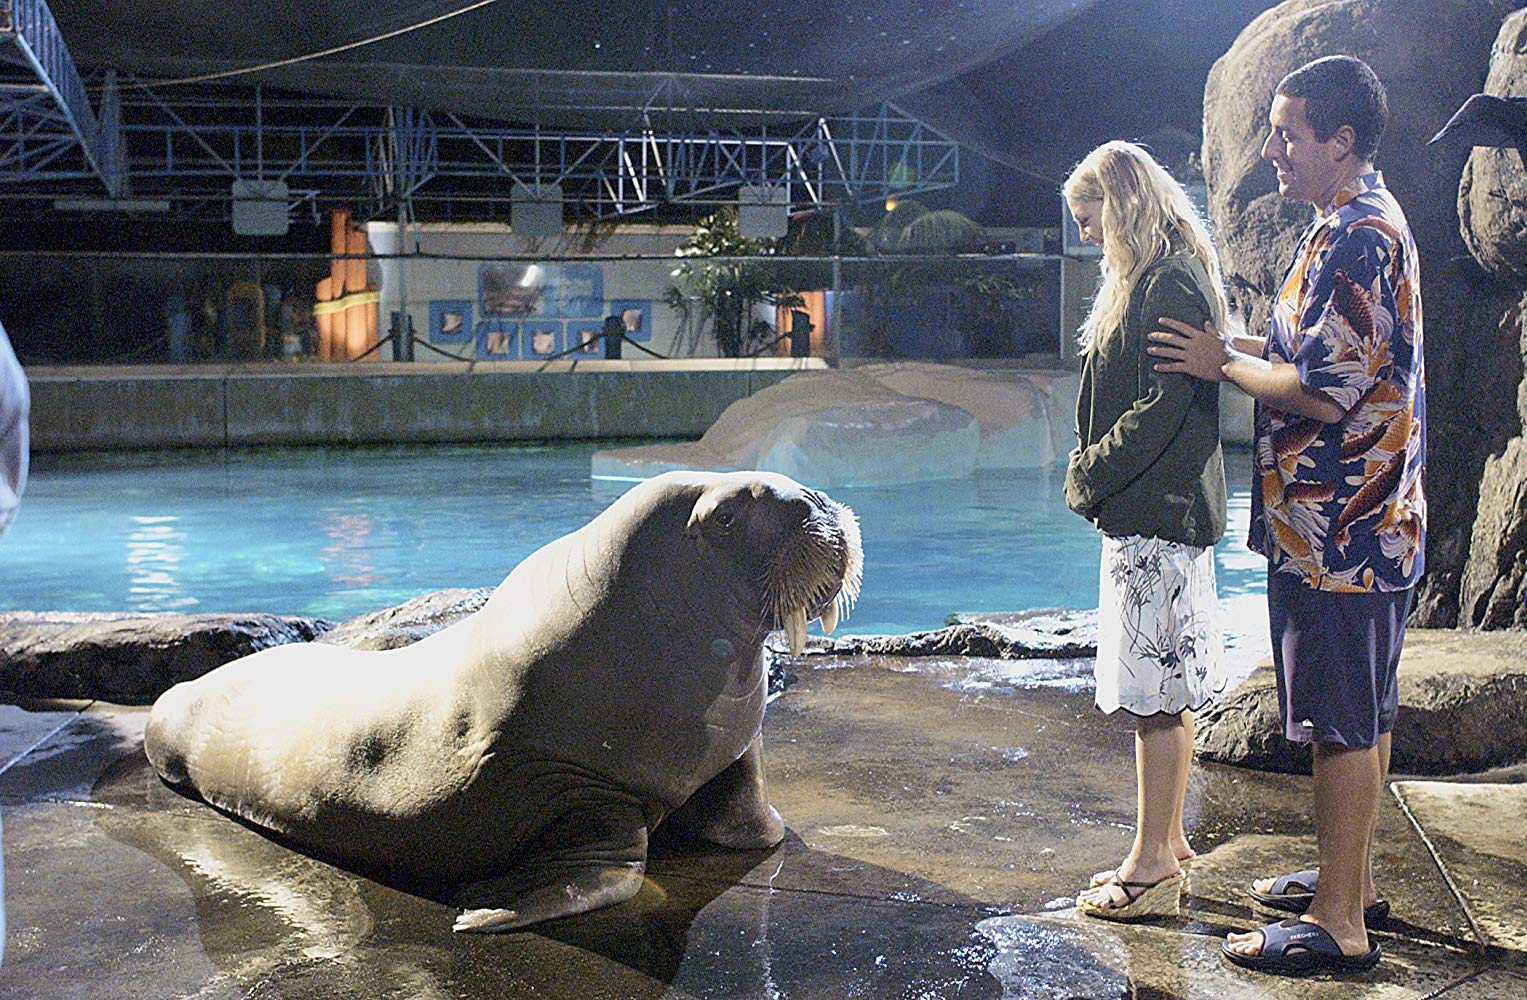 Adam Sandler and Drew Barrymore standing in front of a walrus in a zoo